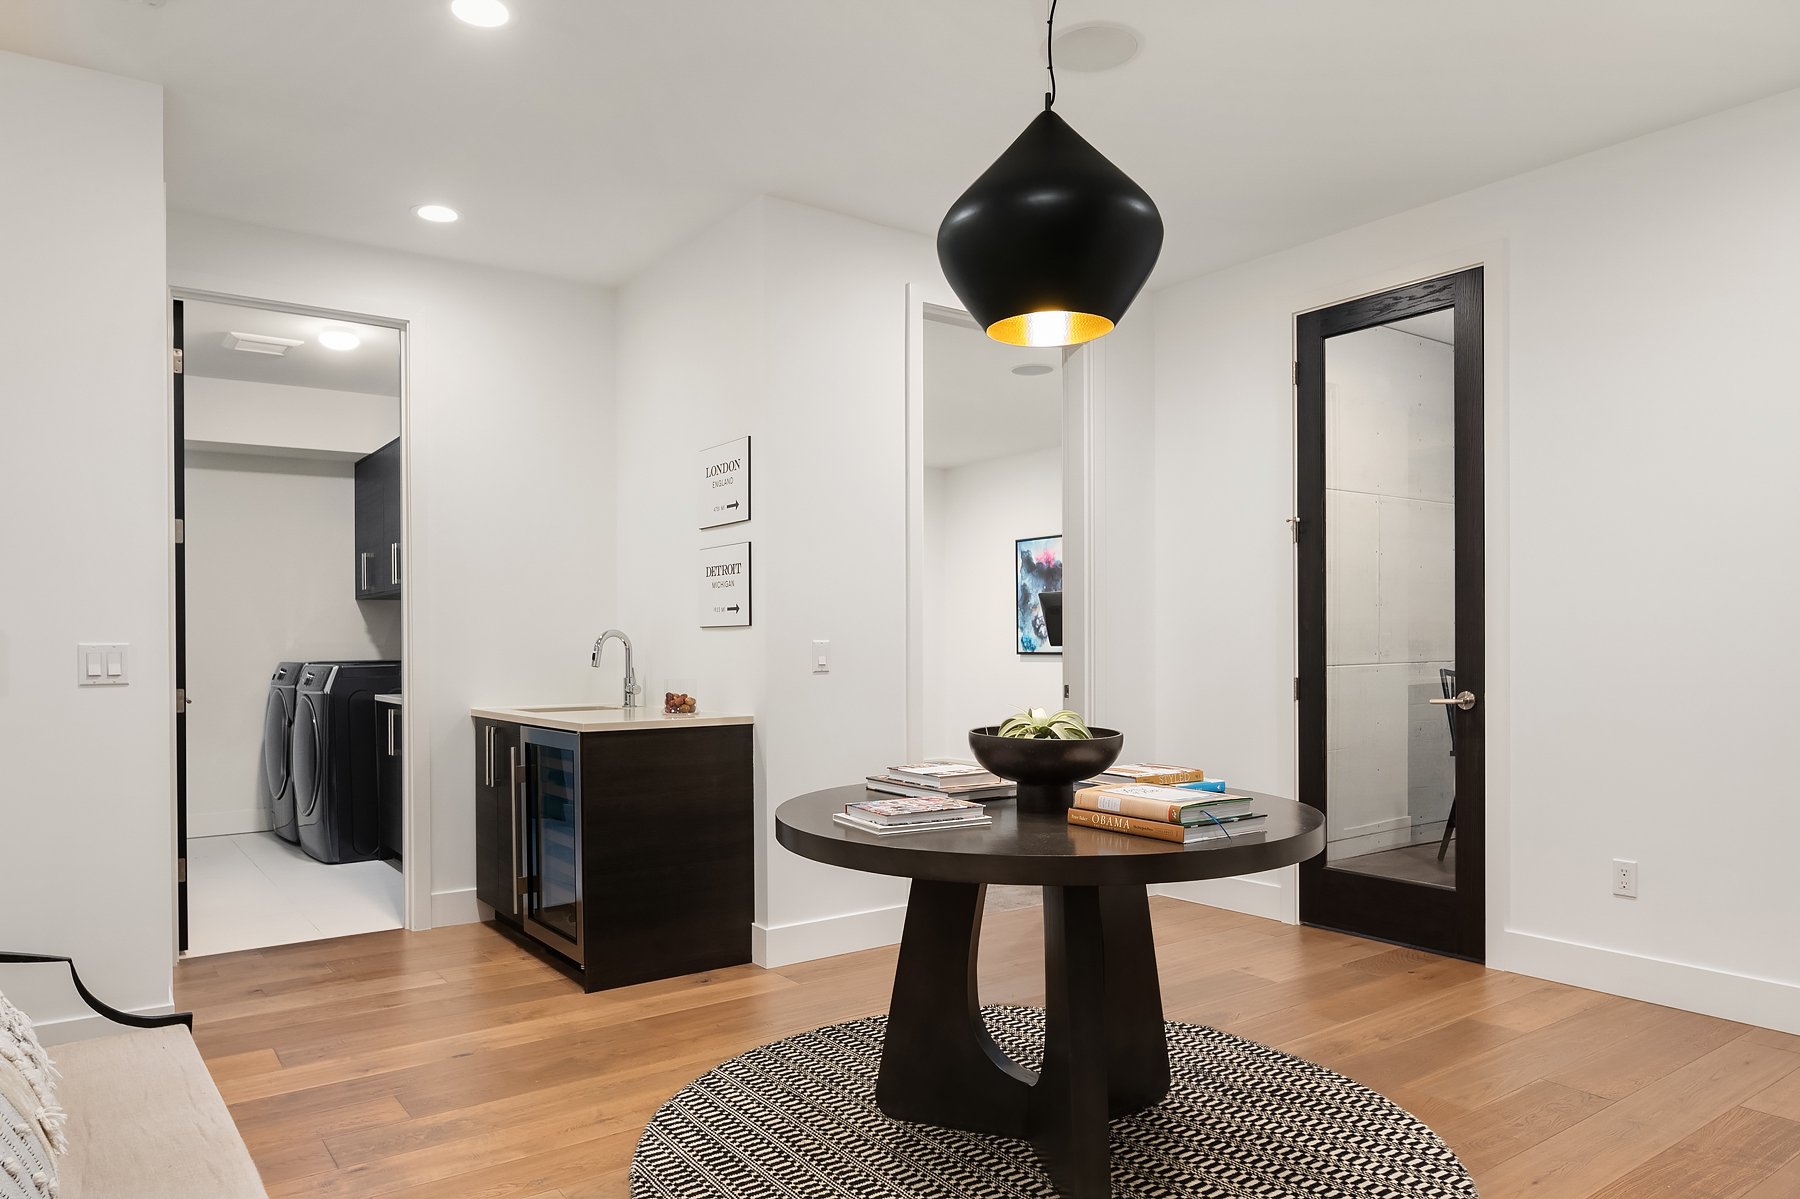  When you head downstairs, you reach this open foyer-room for a large table and bench plus a sink and wine fridge. In the background you can see the laundry room, the door in the middle is up for grabs, but currently used as a workout room. The door 